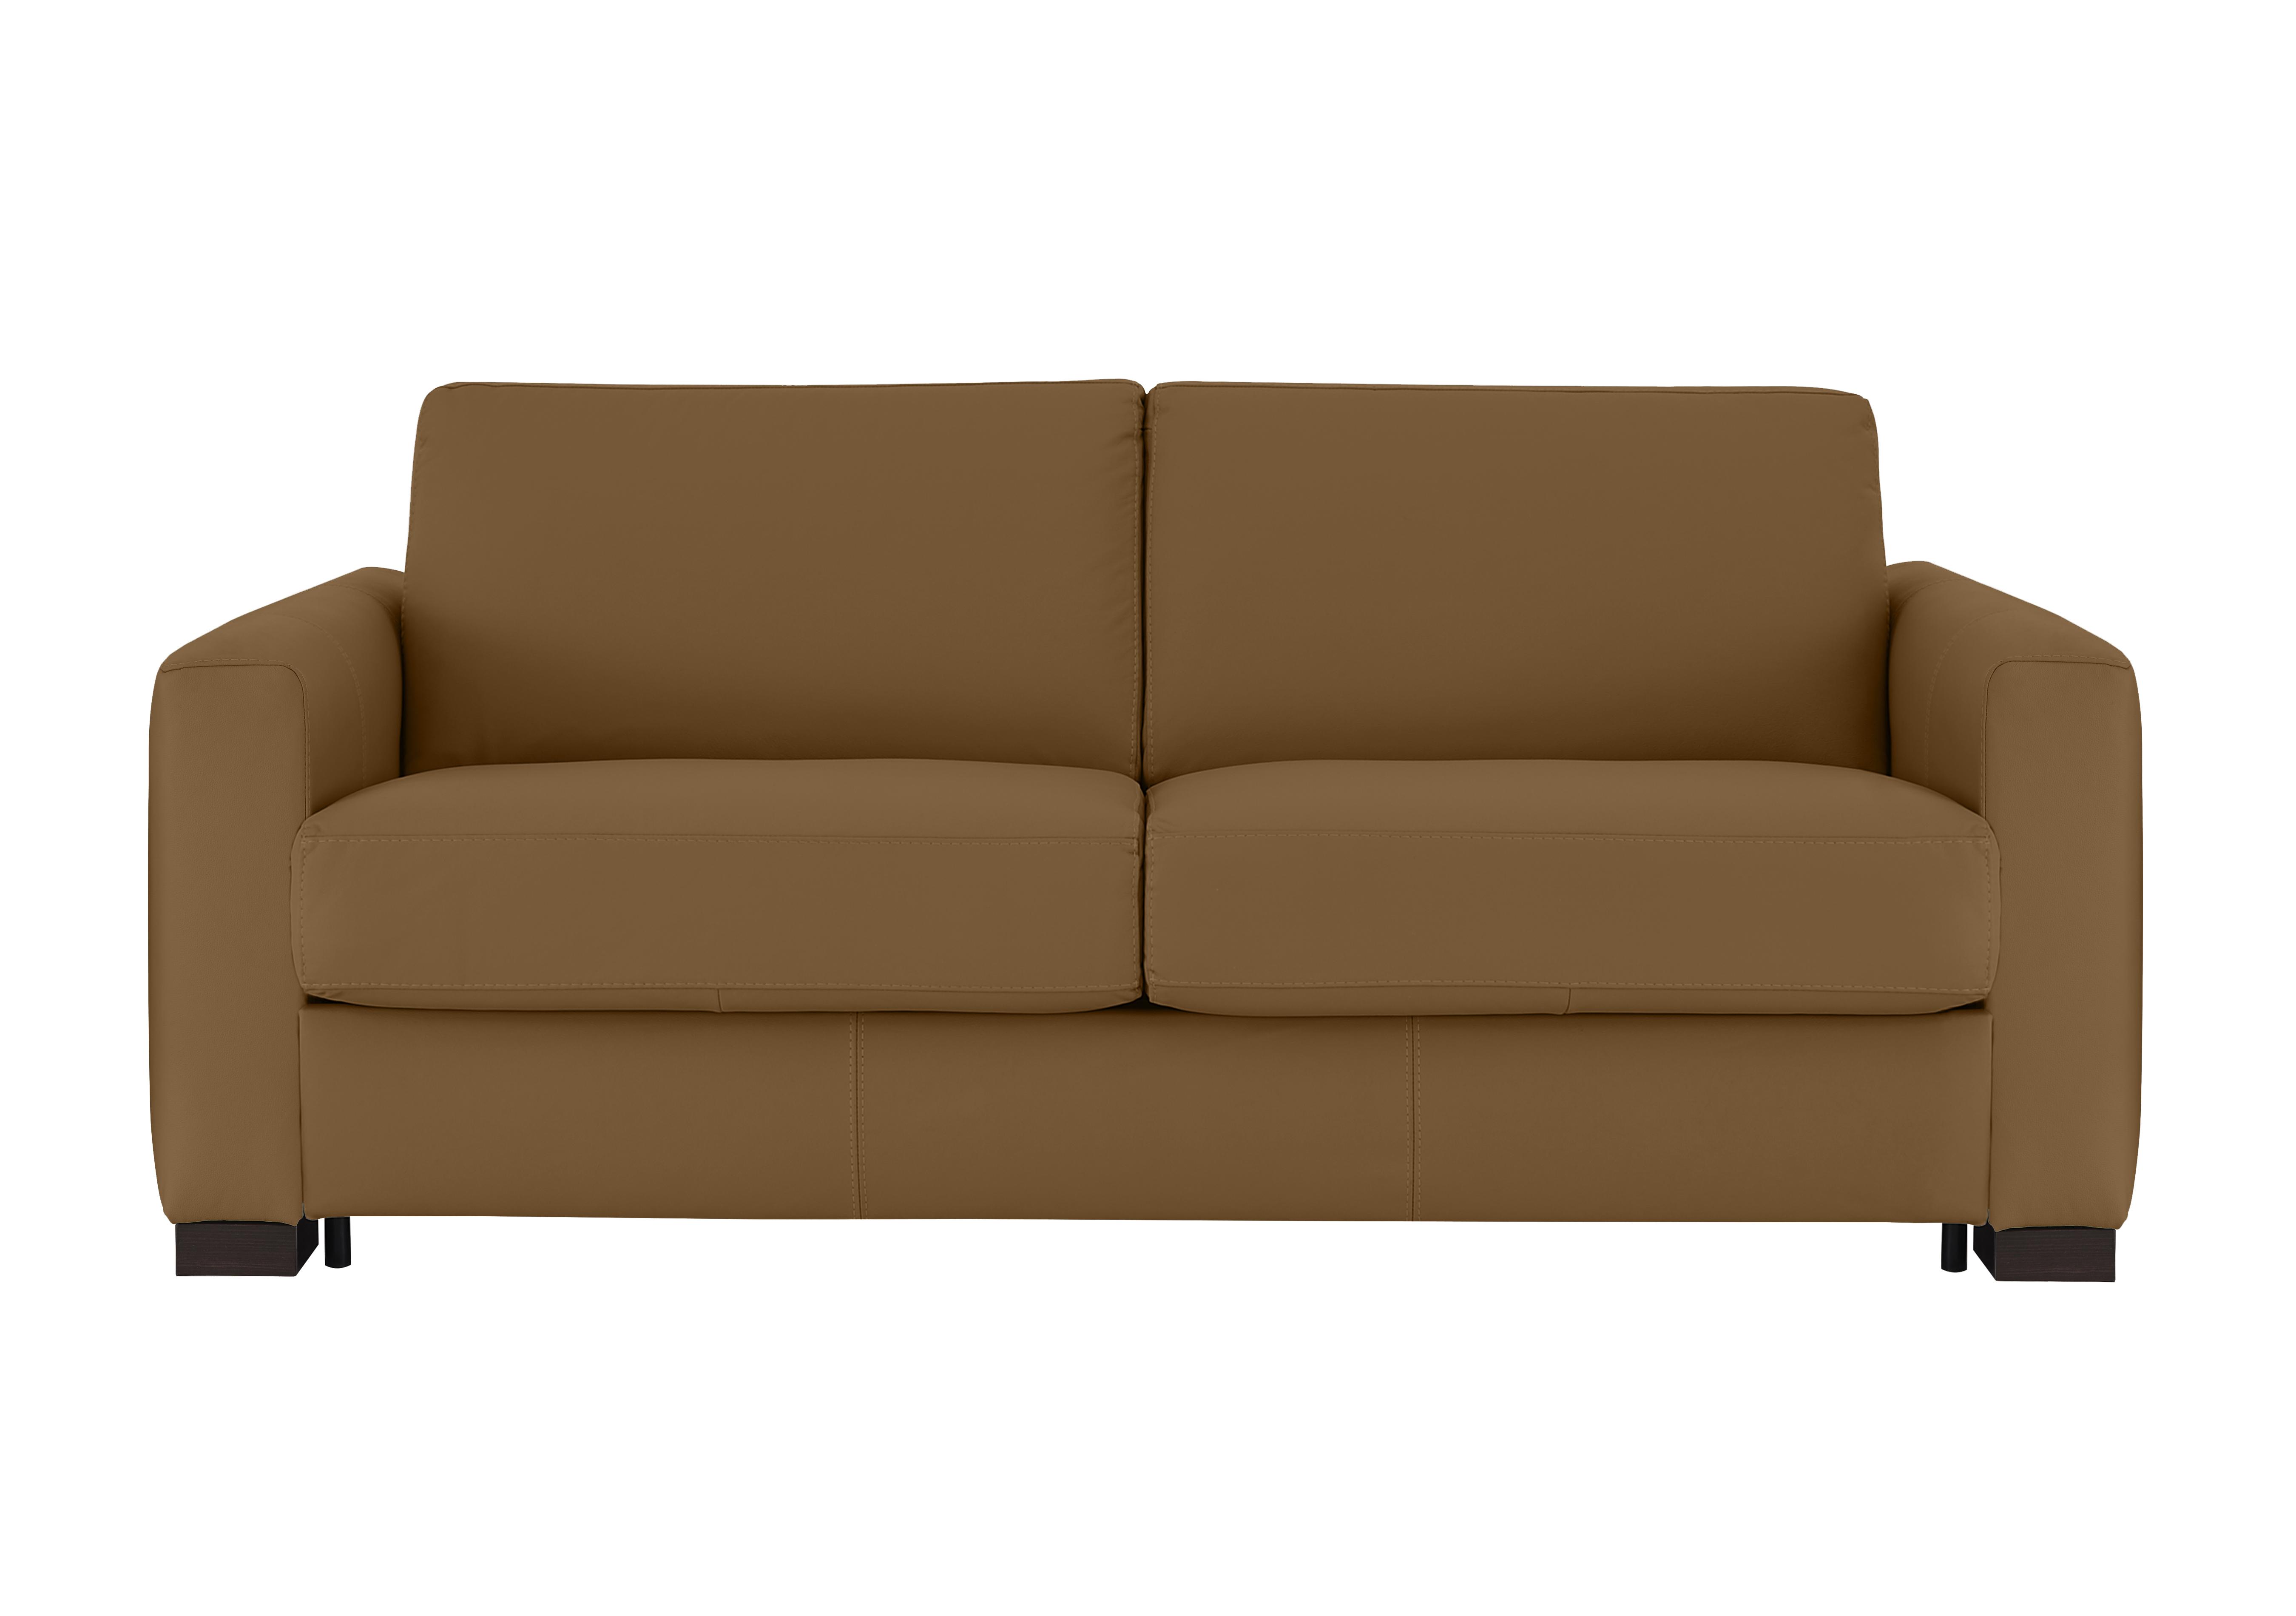 Alcova 3 Seater Leather Sofa Bed with Box Arms in Botero Cuoio 2151 on Furniture Village